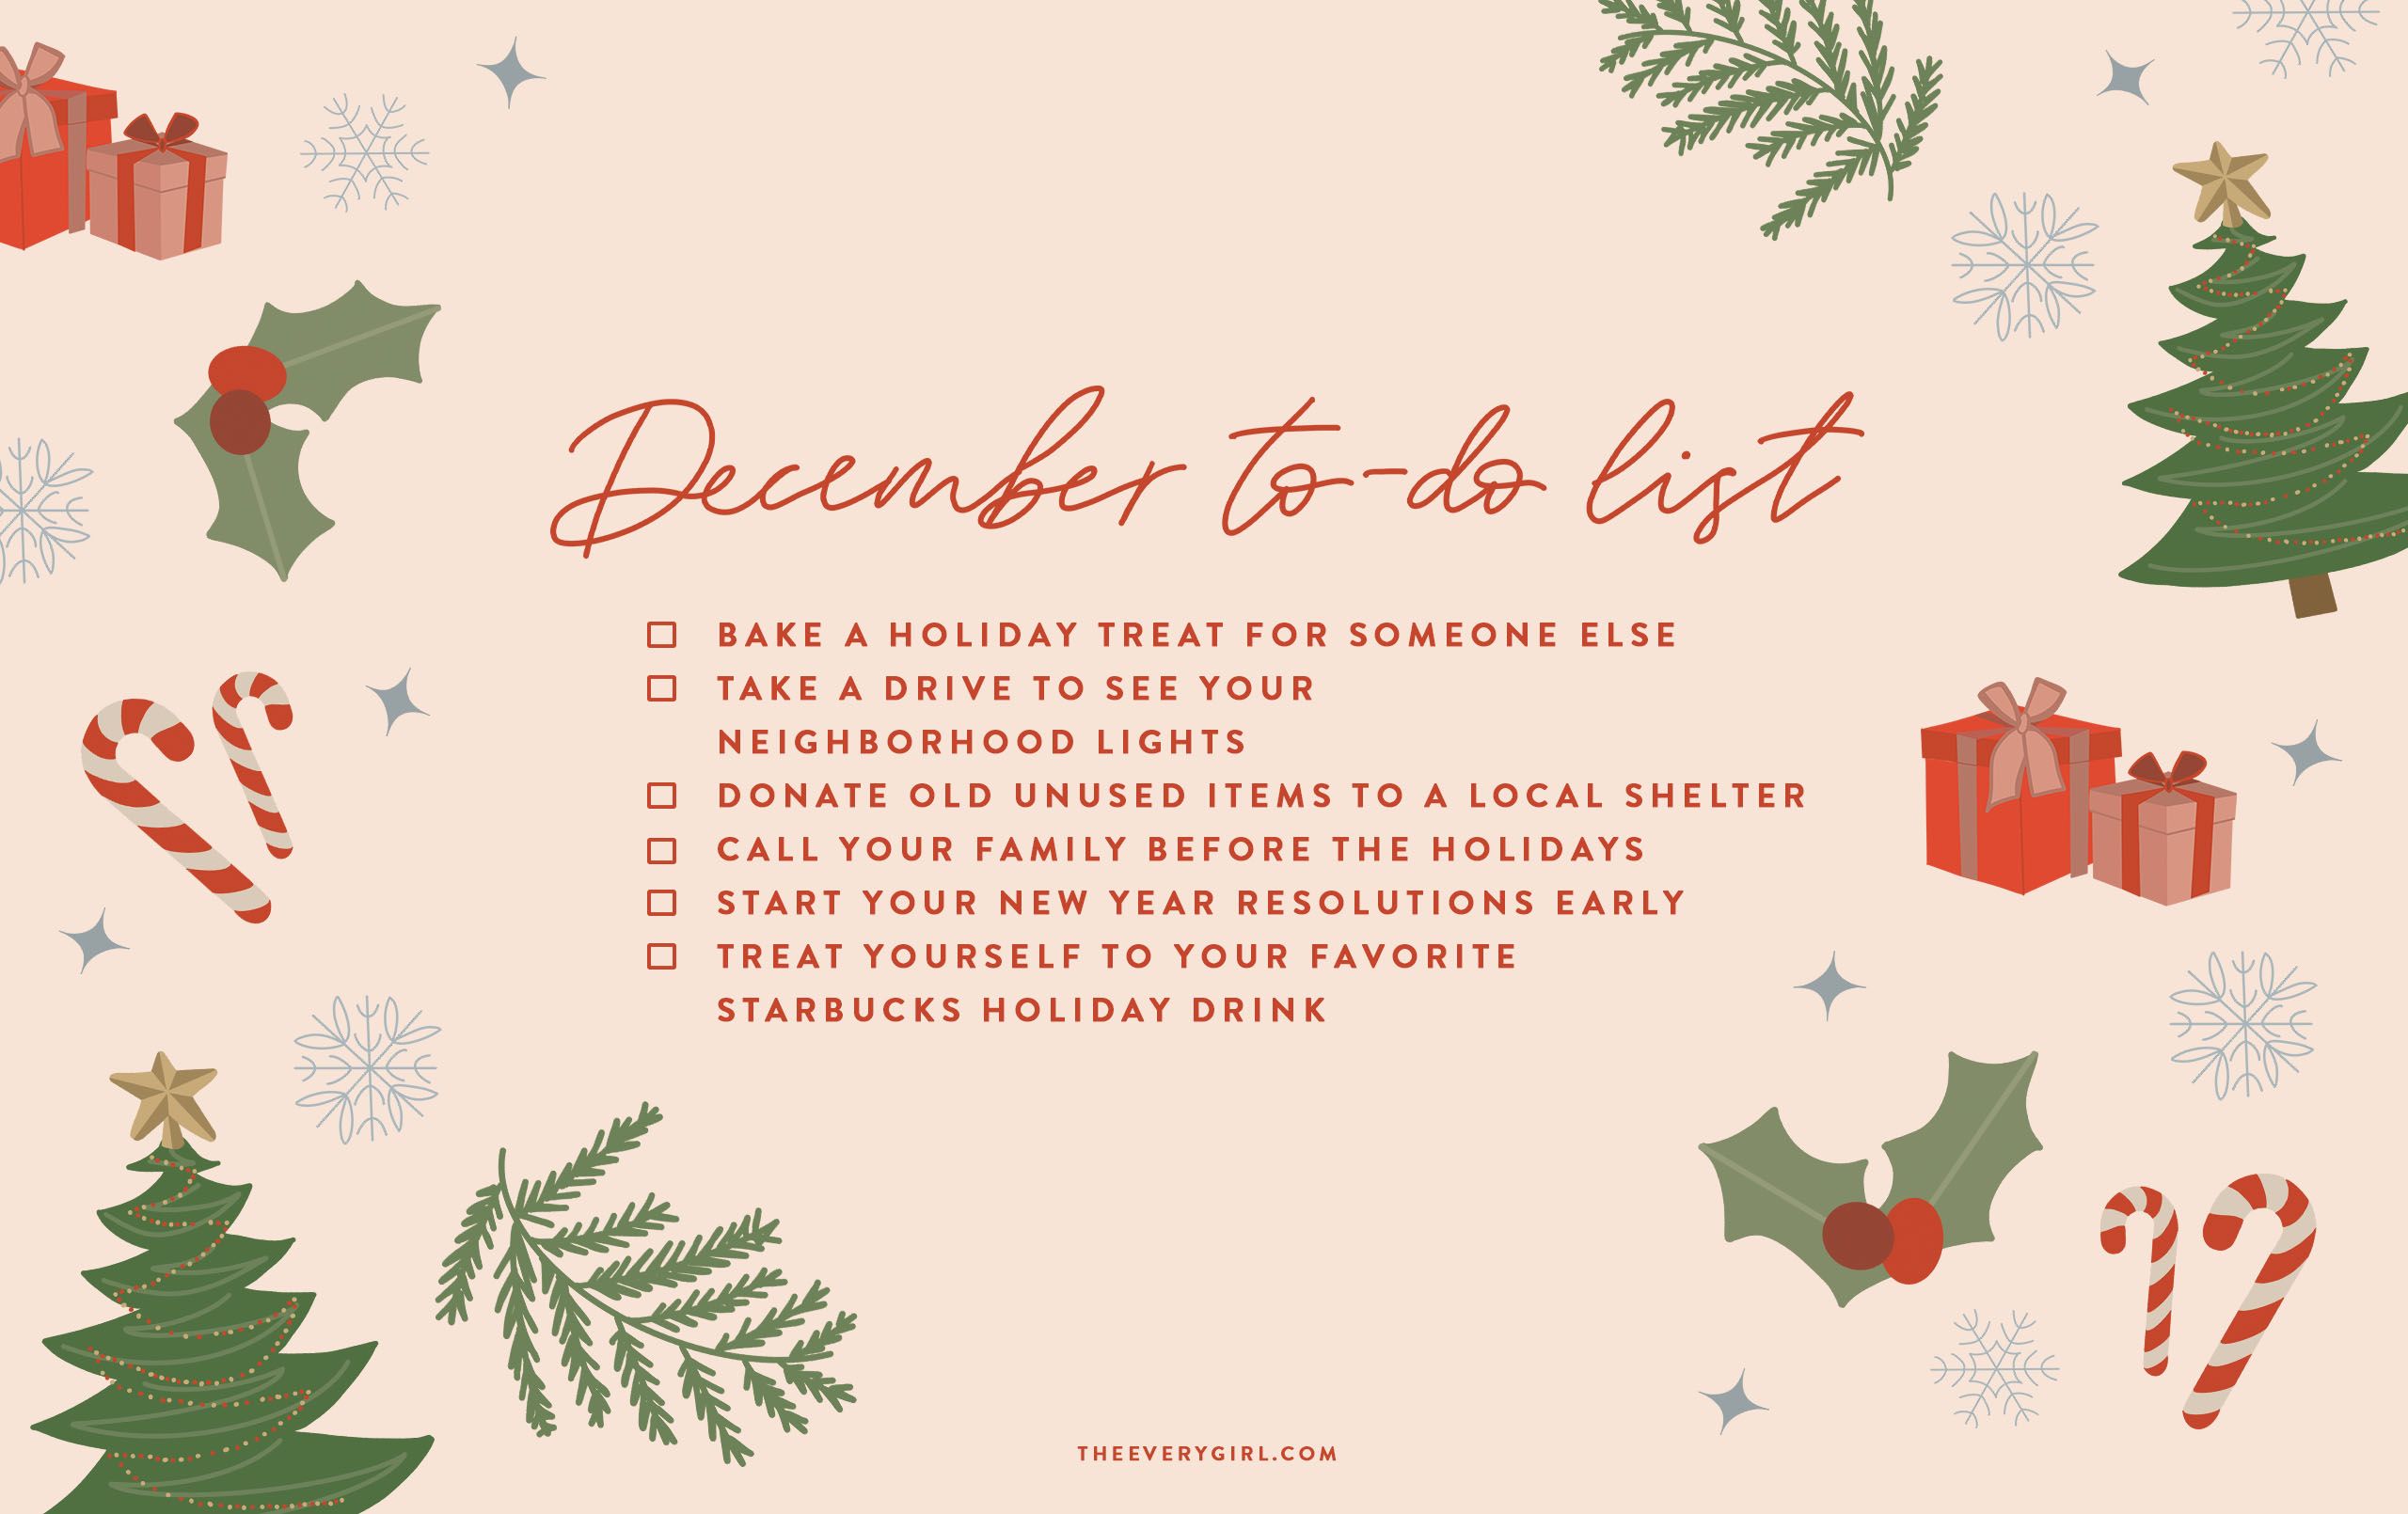 December to-do list: bake a holiday treat for someone else, take a drive to see your neighborhood lights, donate old unused items to a local shelter, call your family before the holidays, start your new year resolutions early, treat yourself to your favorite starbucks holiday drink. - December